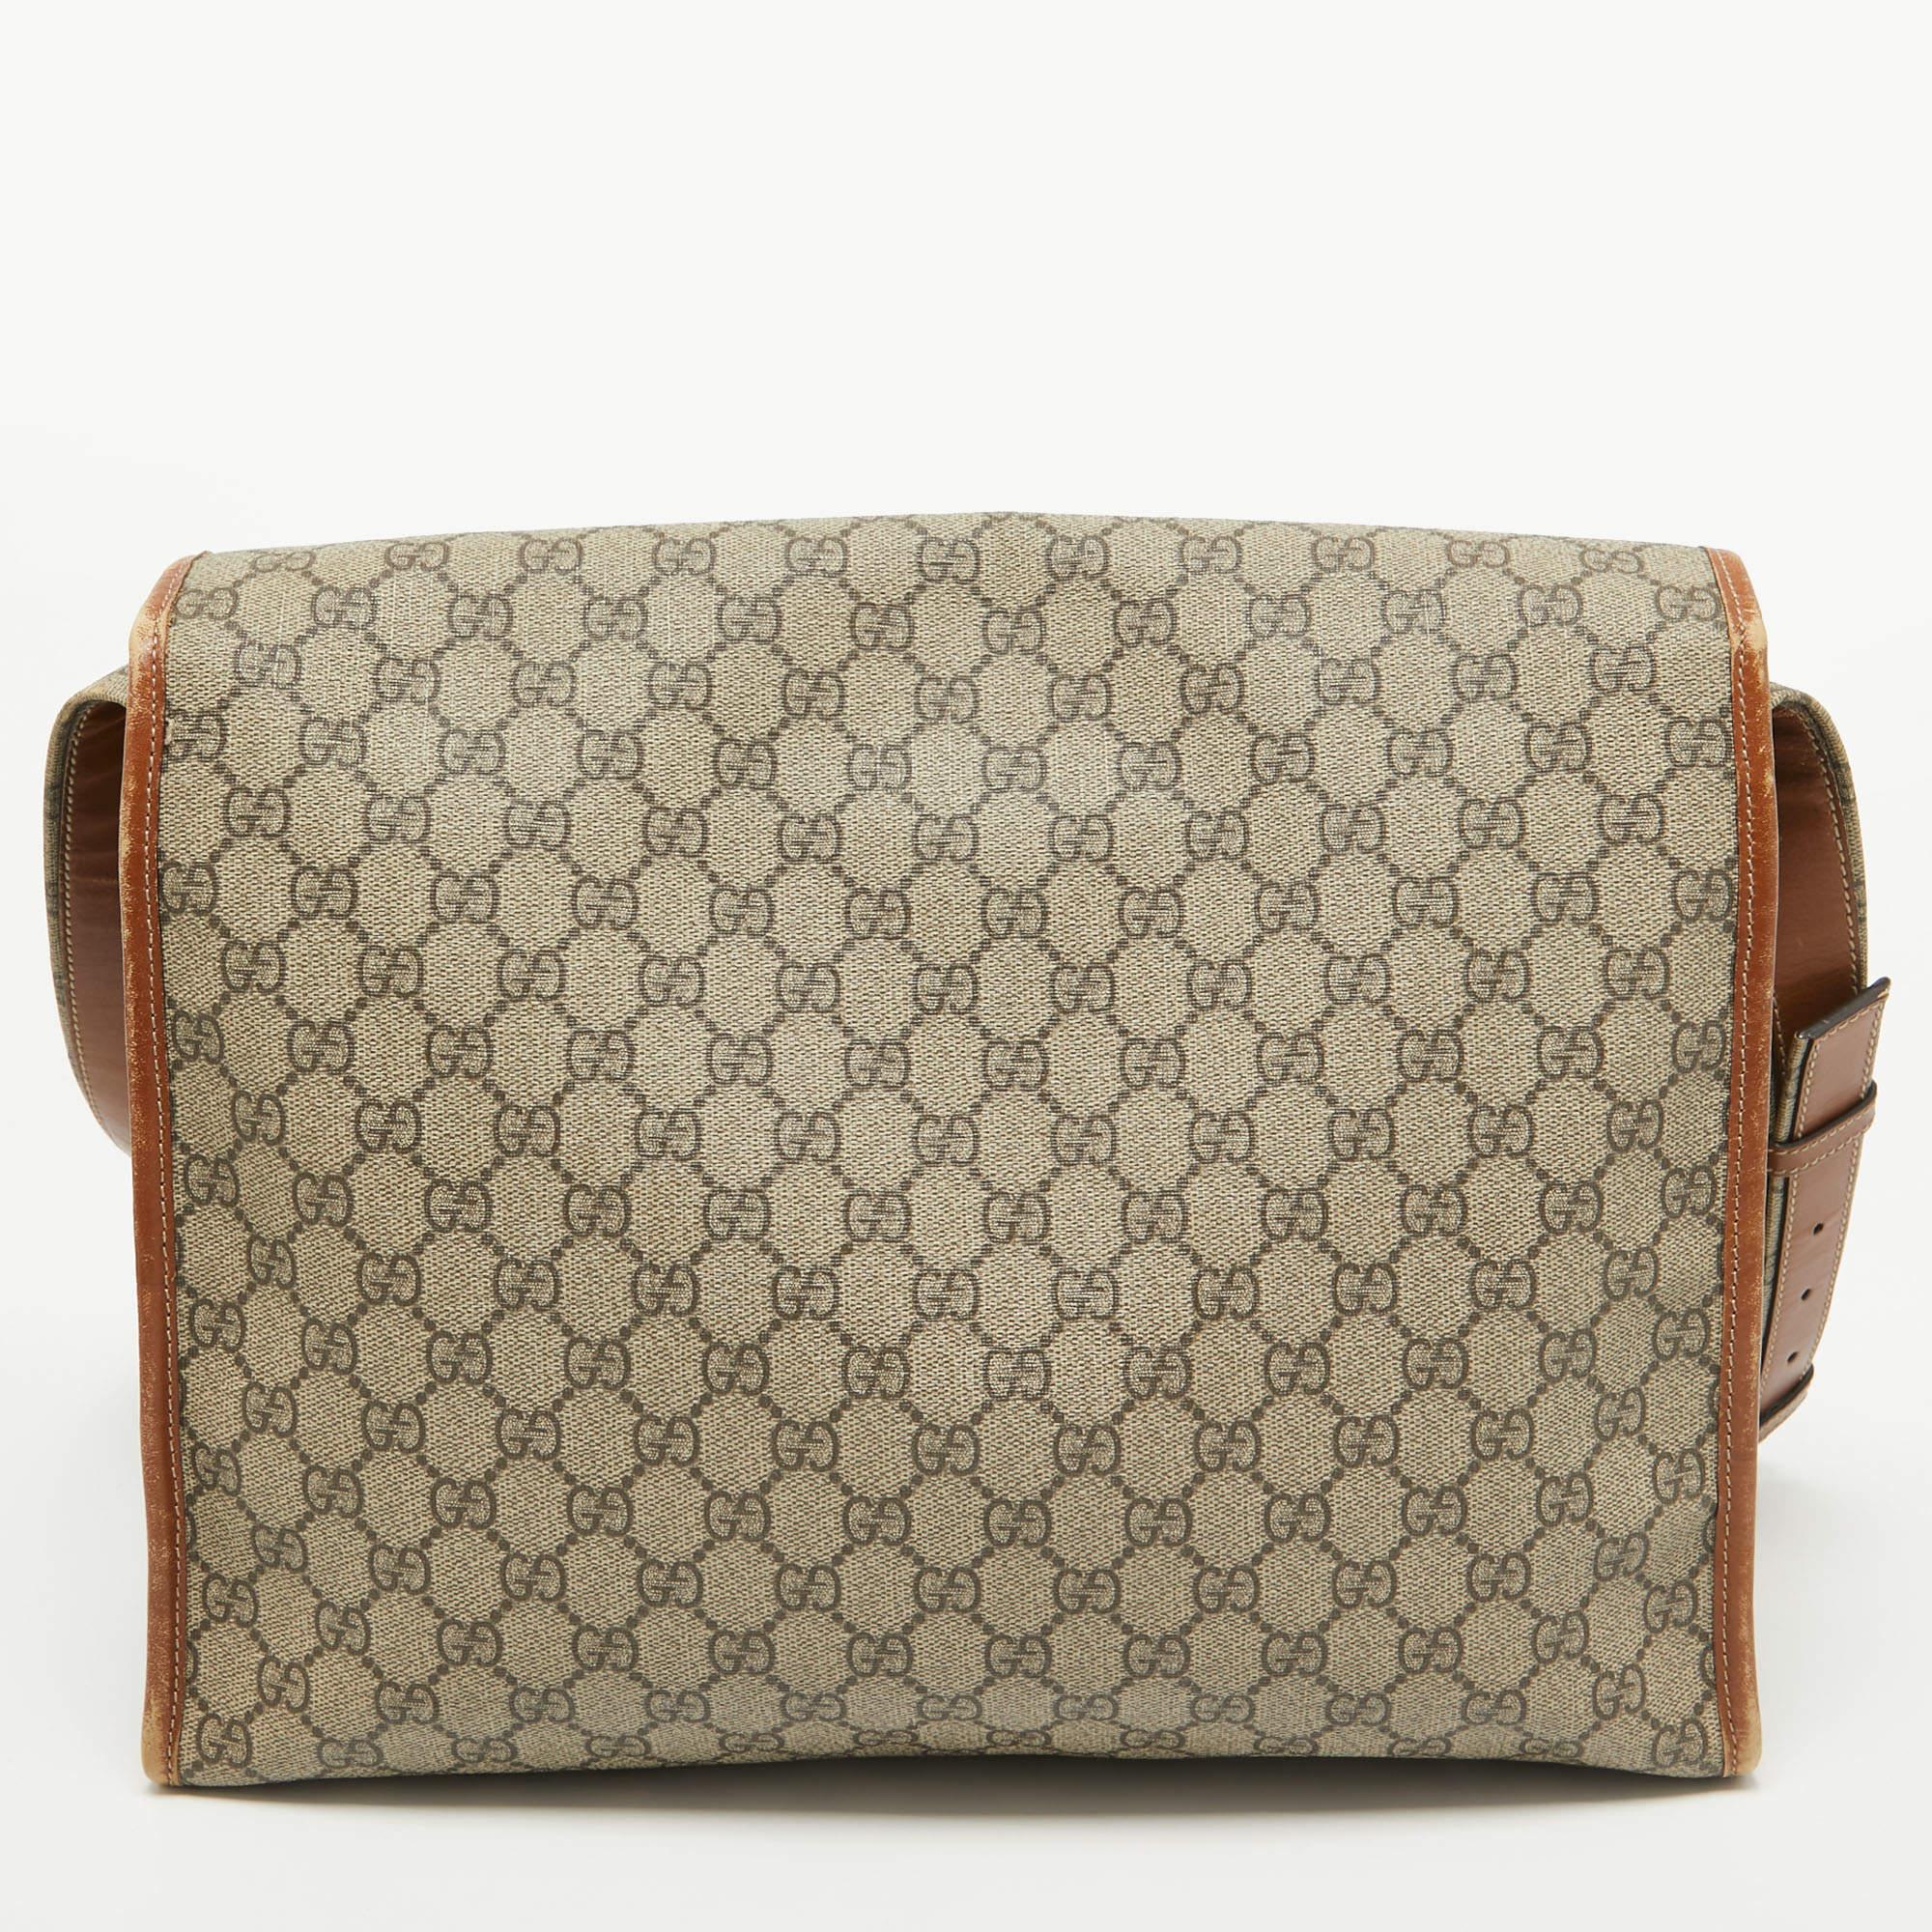 Gucci Beige/Brown GG Supreme Canvas And Leather Messenger Bag For Sale 25